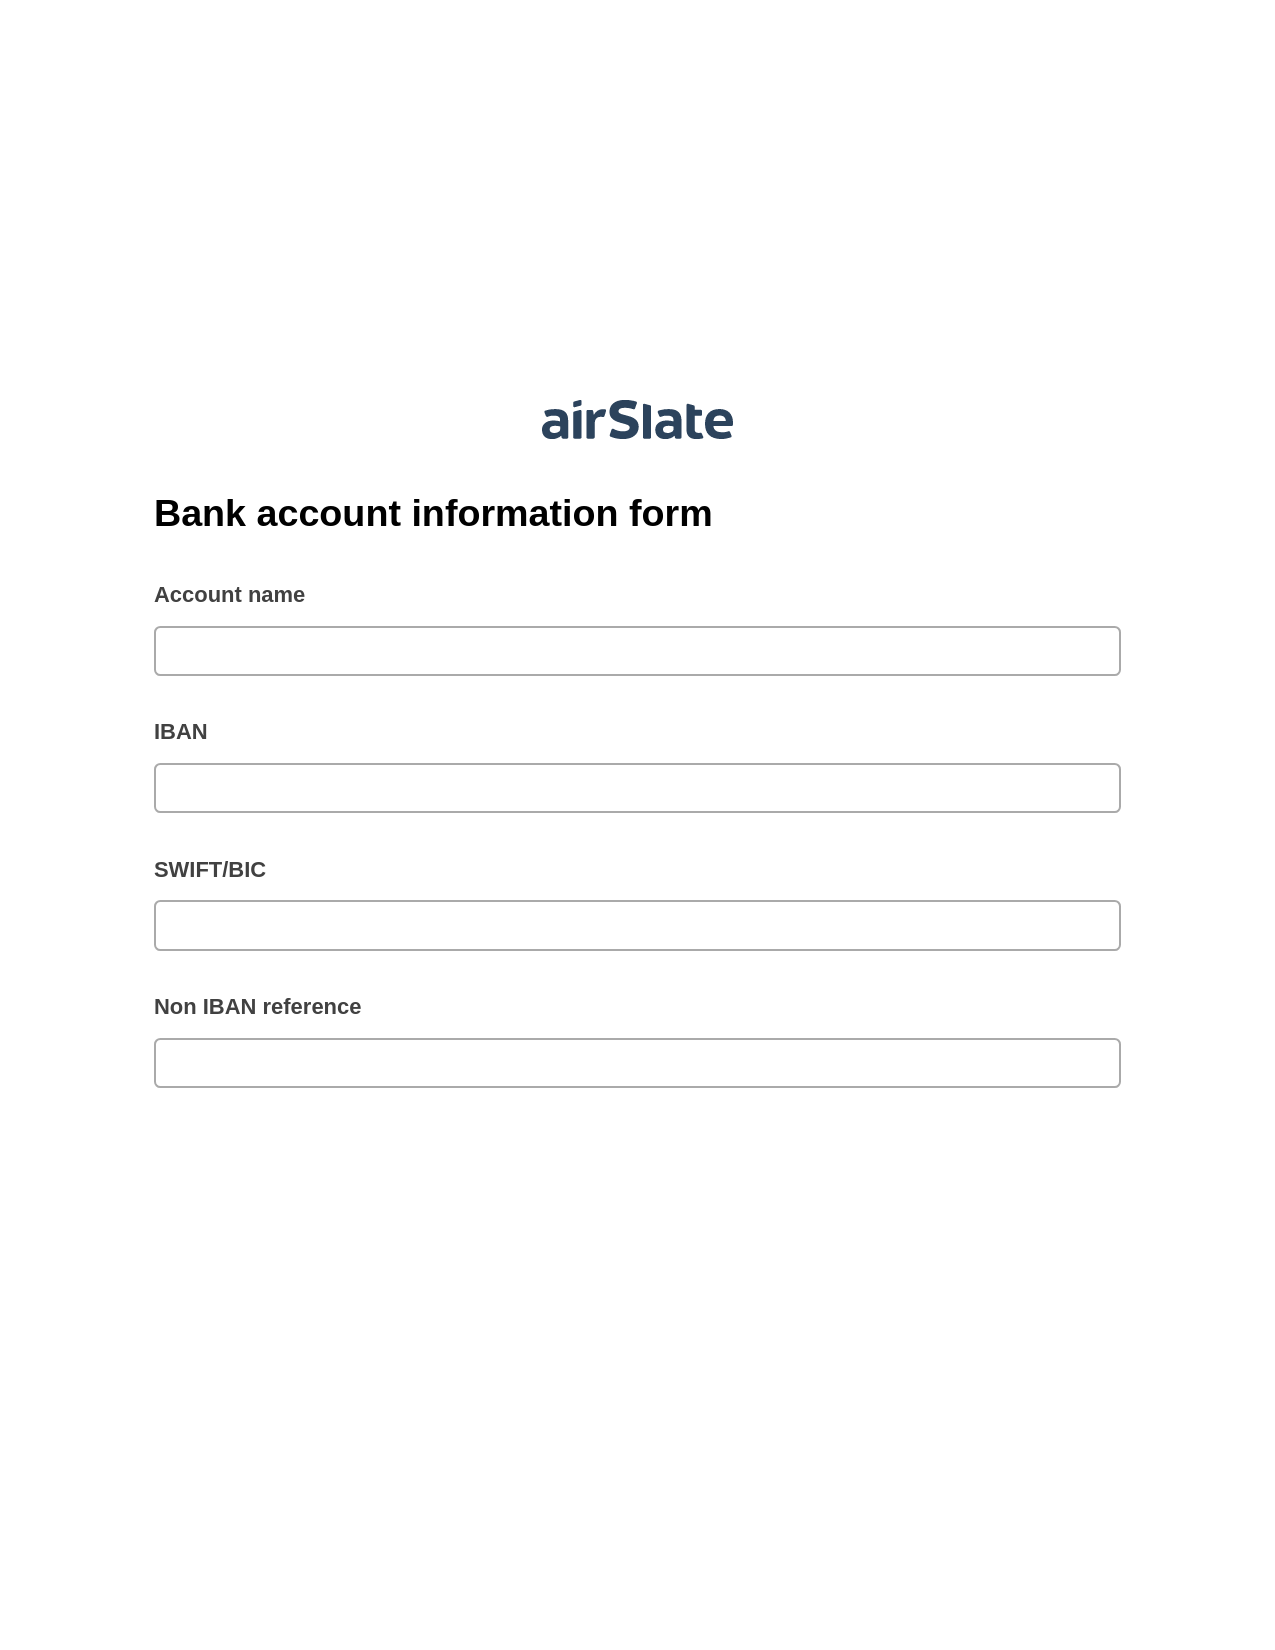 Bank account information form Pre-fill Dropdown from Airtable, Update Salesforce Record Bot, Archive to SharePoint Folder Bot